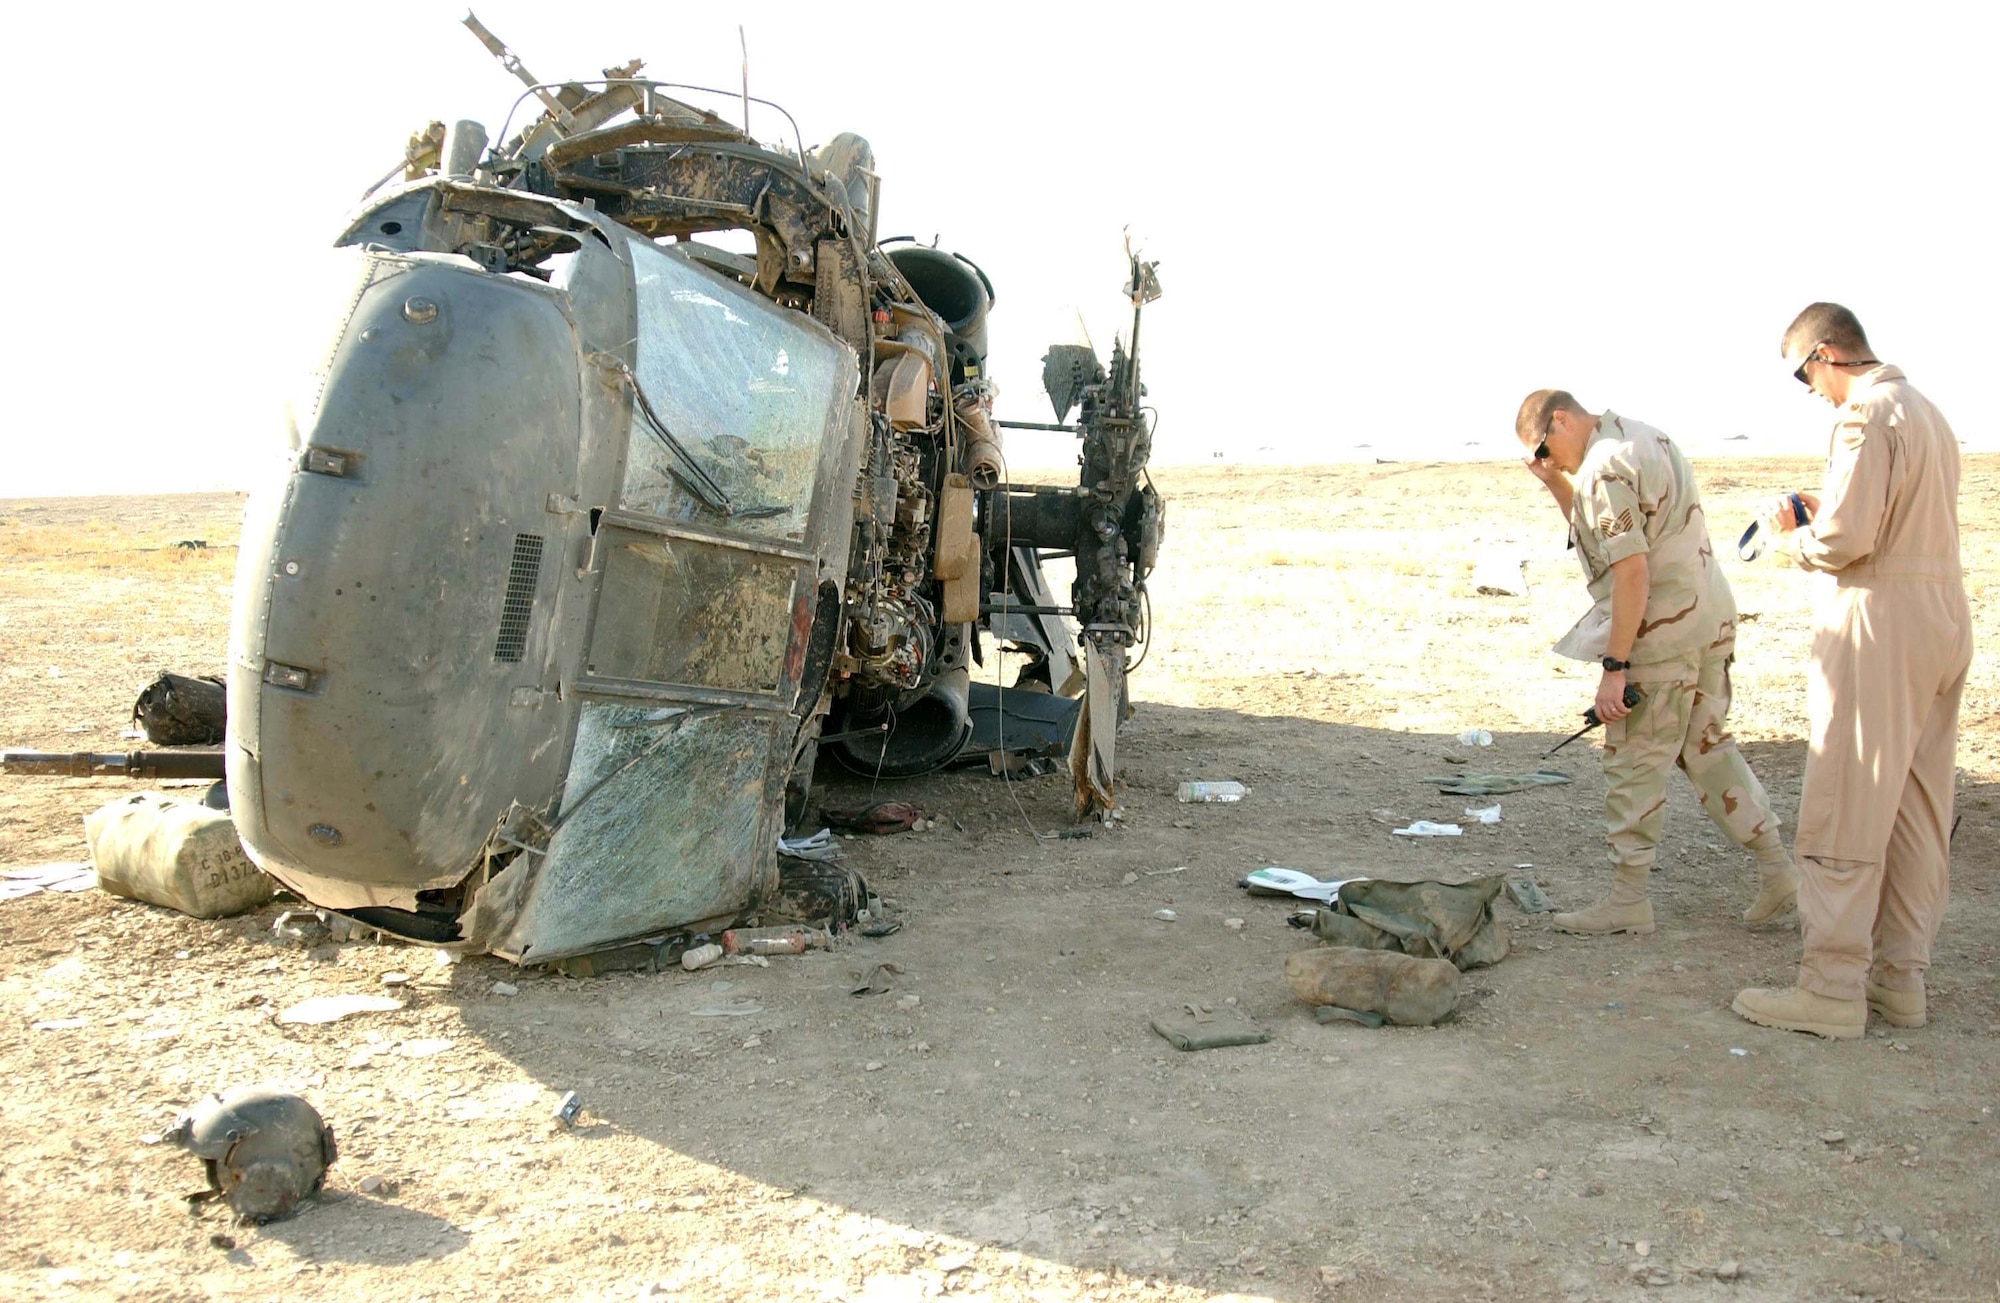 TALLIL AIR BASE, Iraq -- Local safety officials inspect the wreckage of a Sept. 21 Army UH-60 Blackhawk crash here.  All four Soldiers on board were rescued from the helicopter by people of the 407th Air Expeditionary Group and 407th Expeditionary Medical Squadron.  (U.S. Air Force photo by Airman 1st Class Jeff Andrejcik)